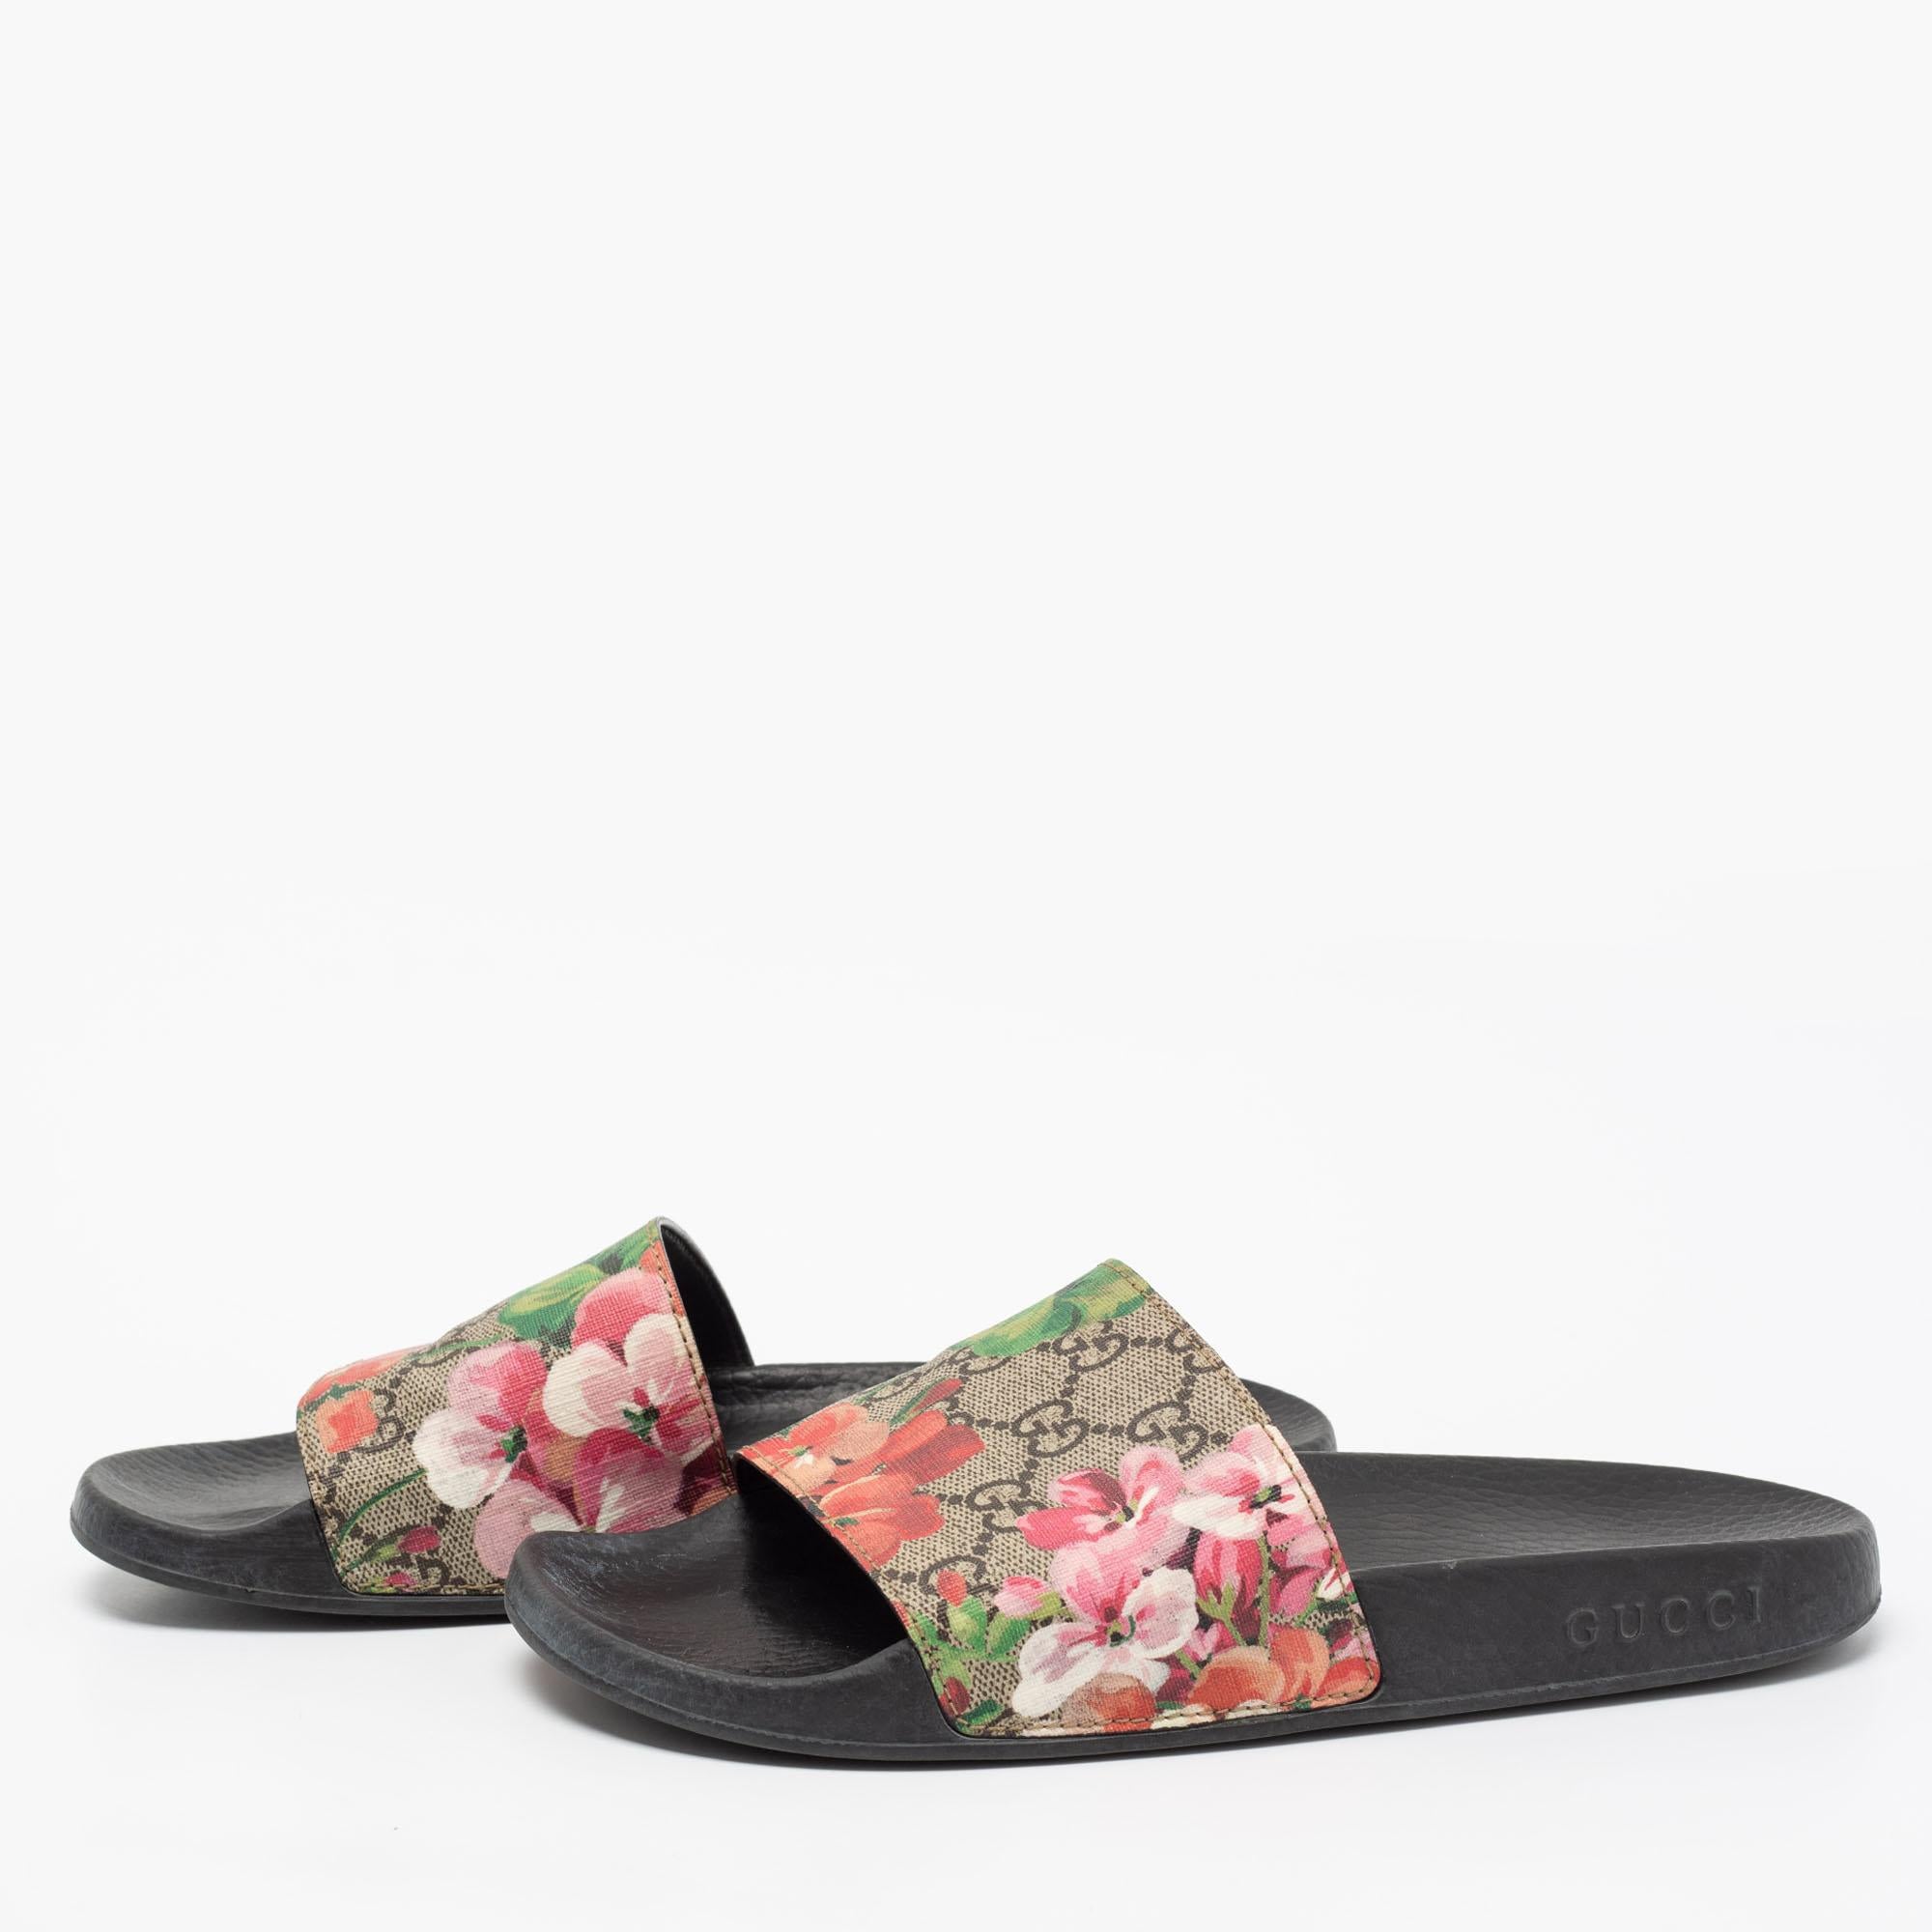 Showcases your elevated style by sliding into these Gucci sandals. Crafted from GG coated canvas, the design is highlighted with blooms on the vamps and are functional with rubber soles.

